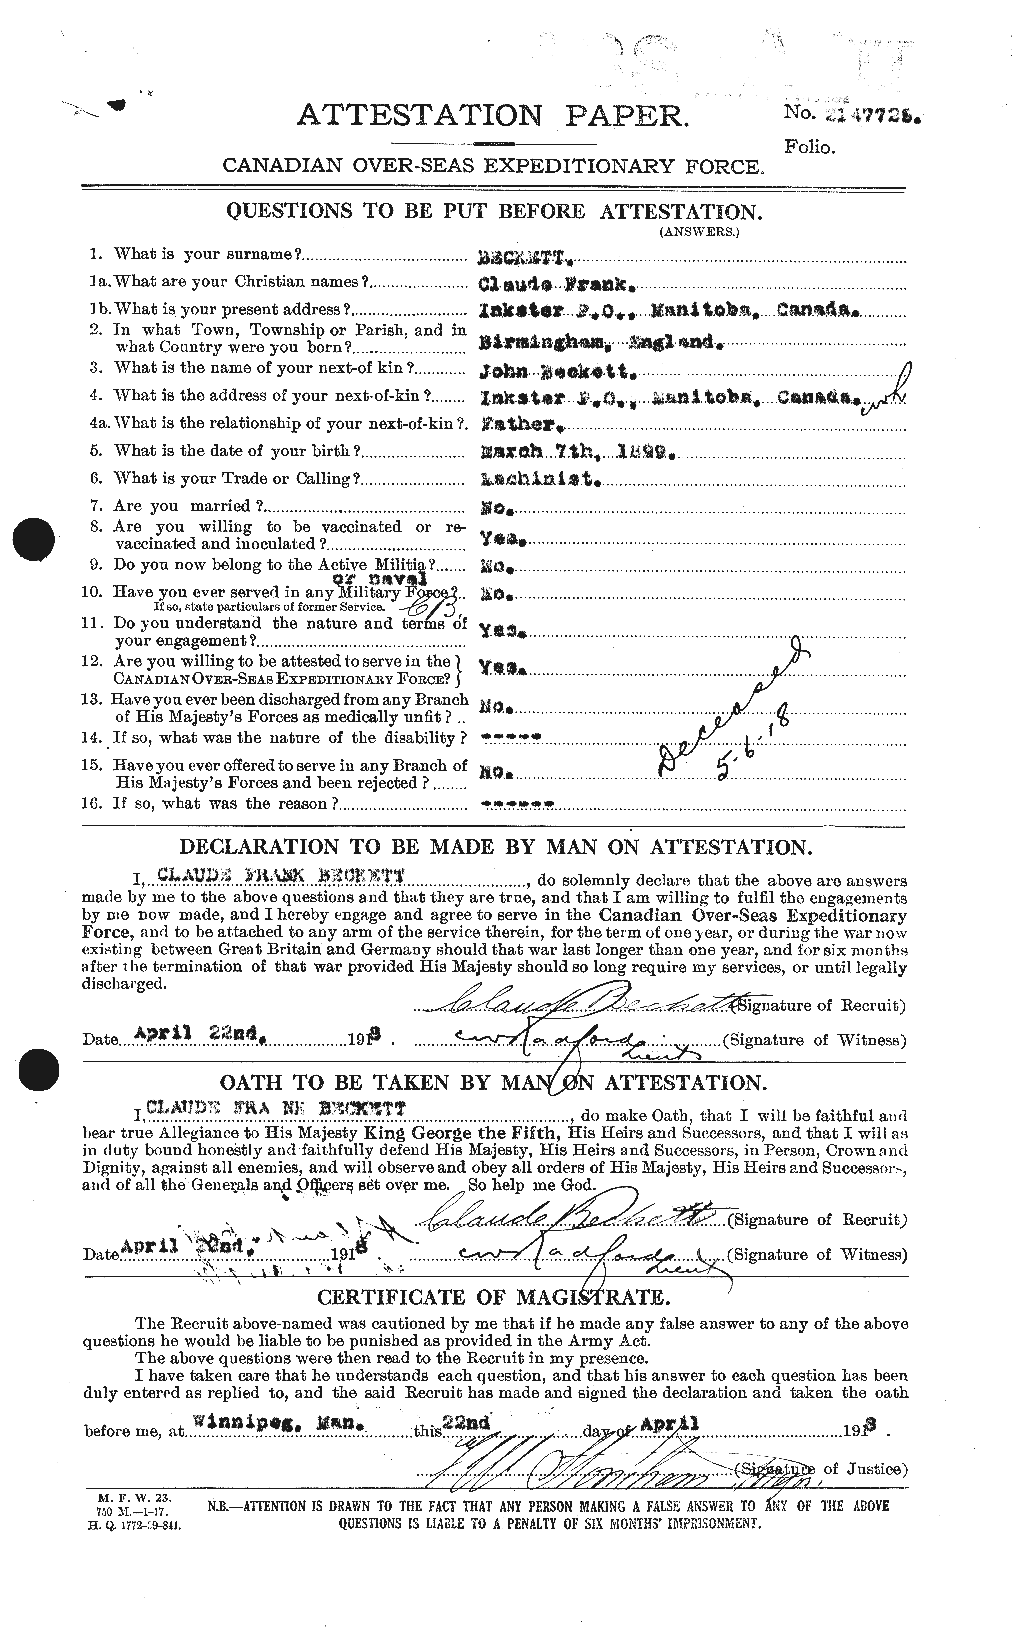 Personnel Records of the First World War - CEF 232353a